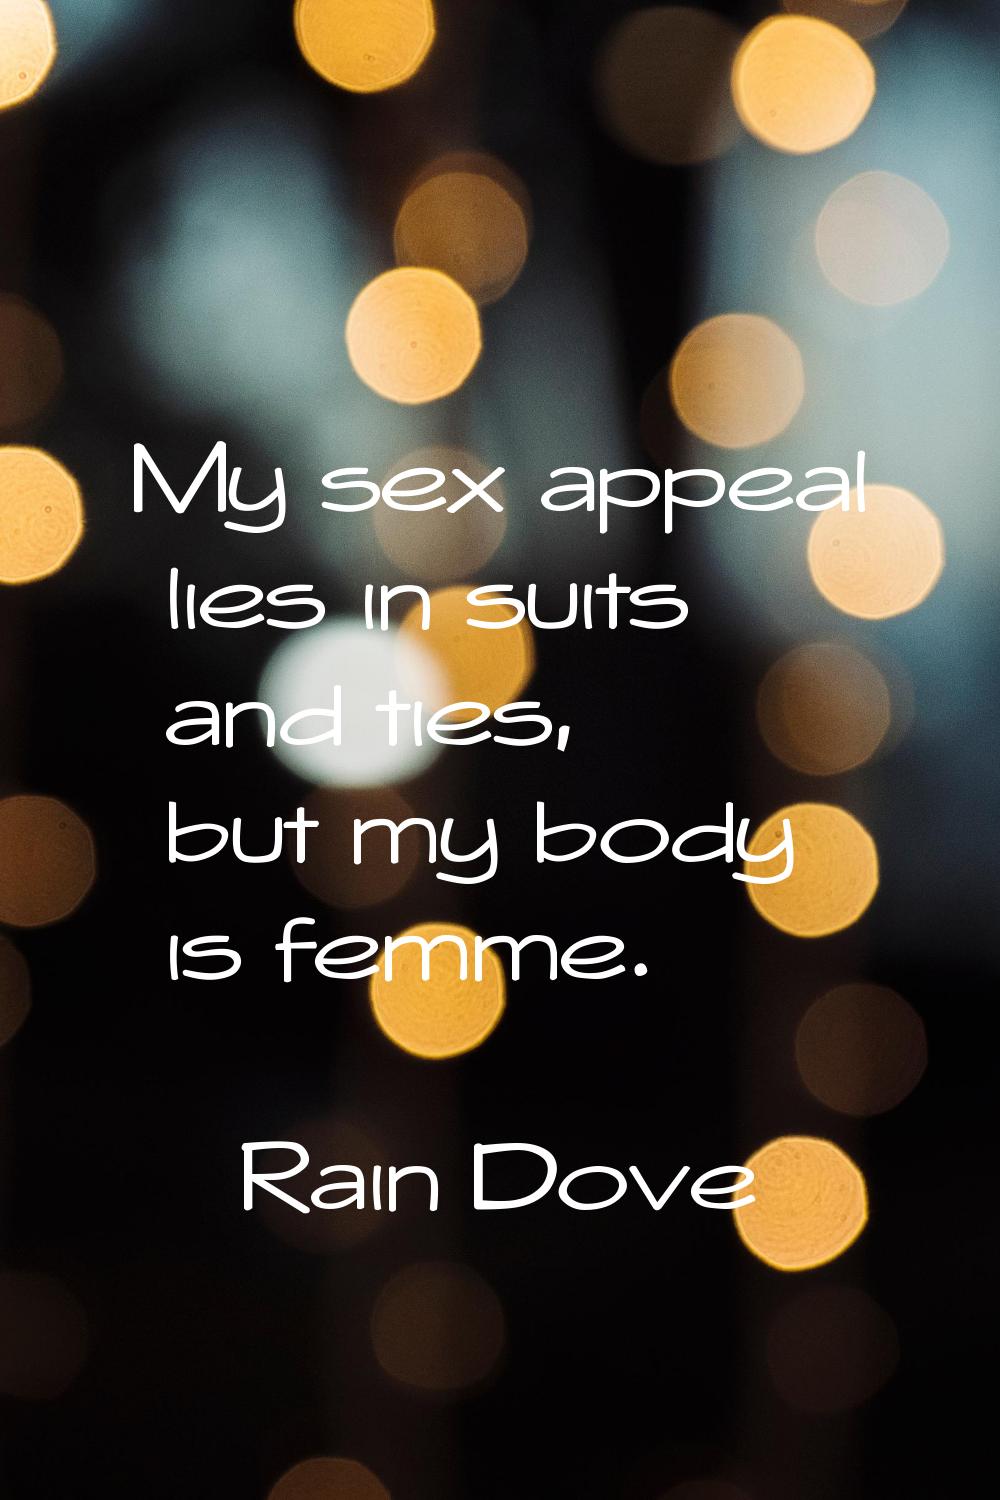 My sex appeal lies in suits and ties, but my body is femme.